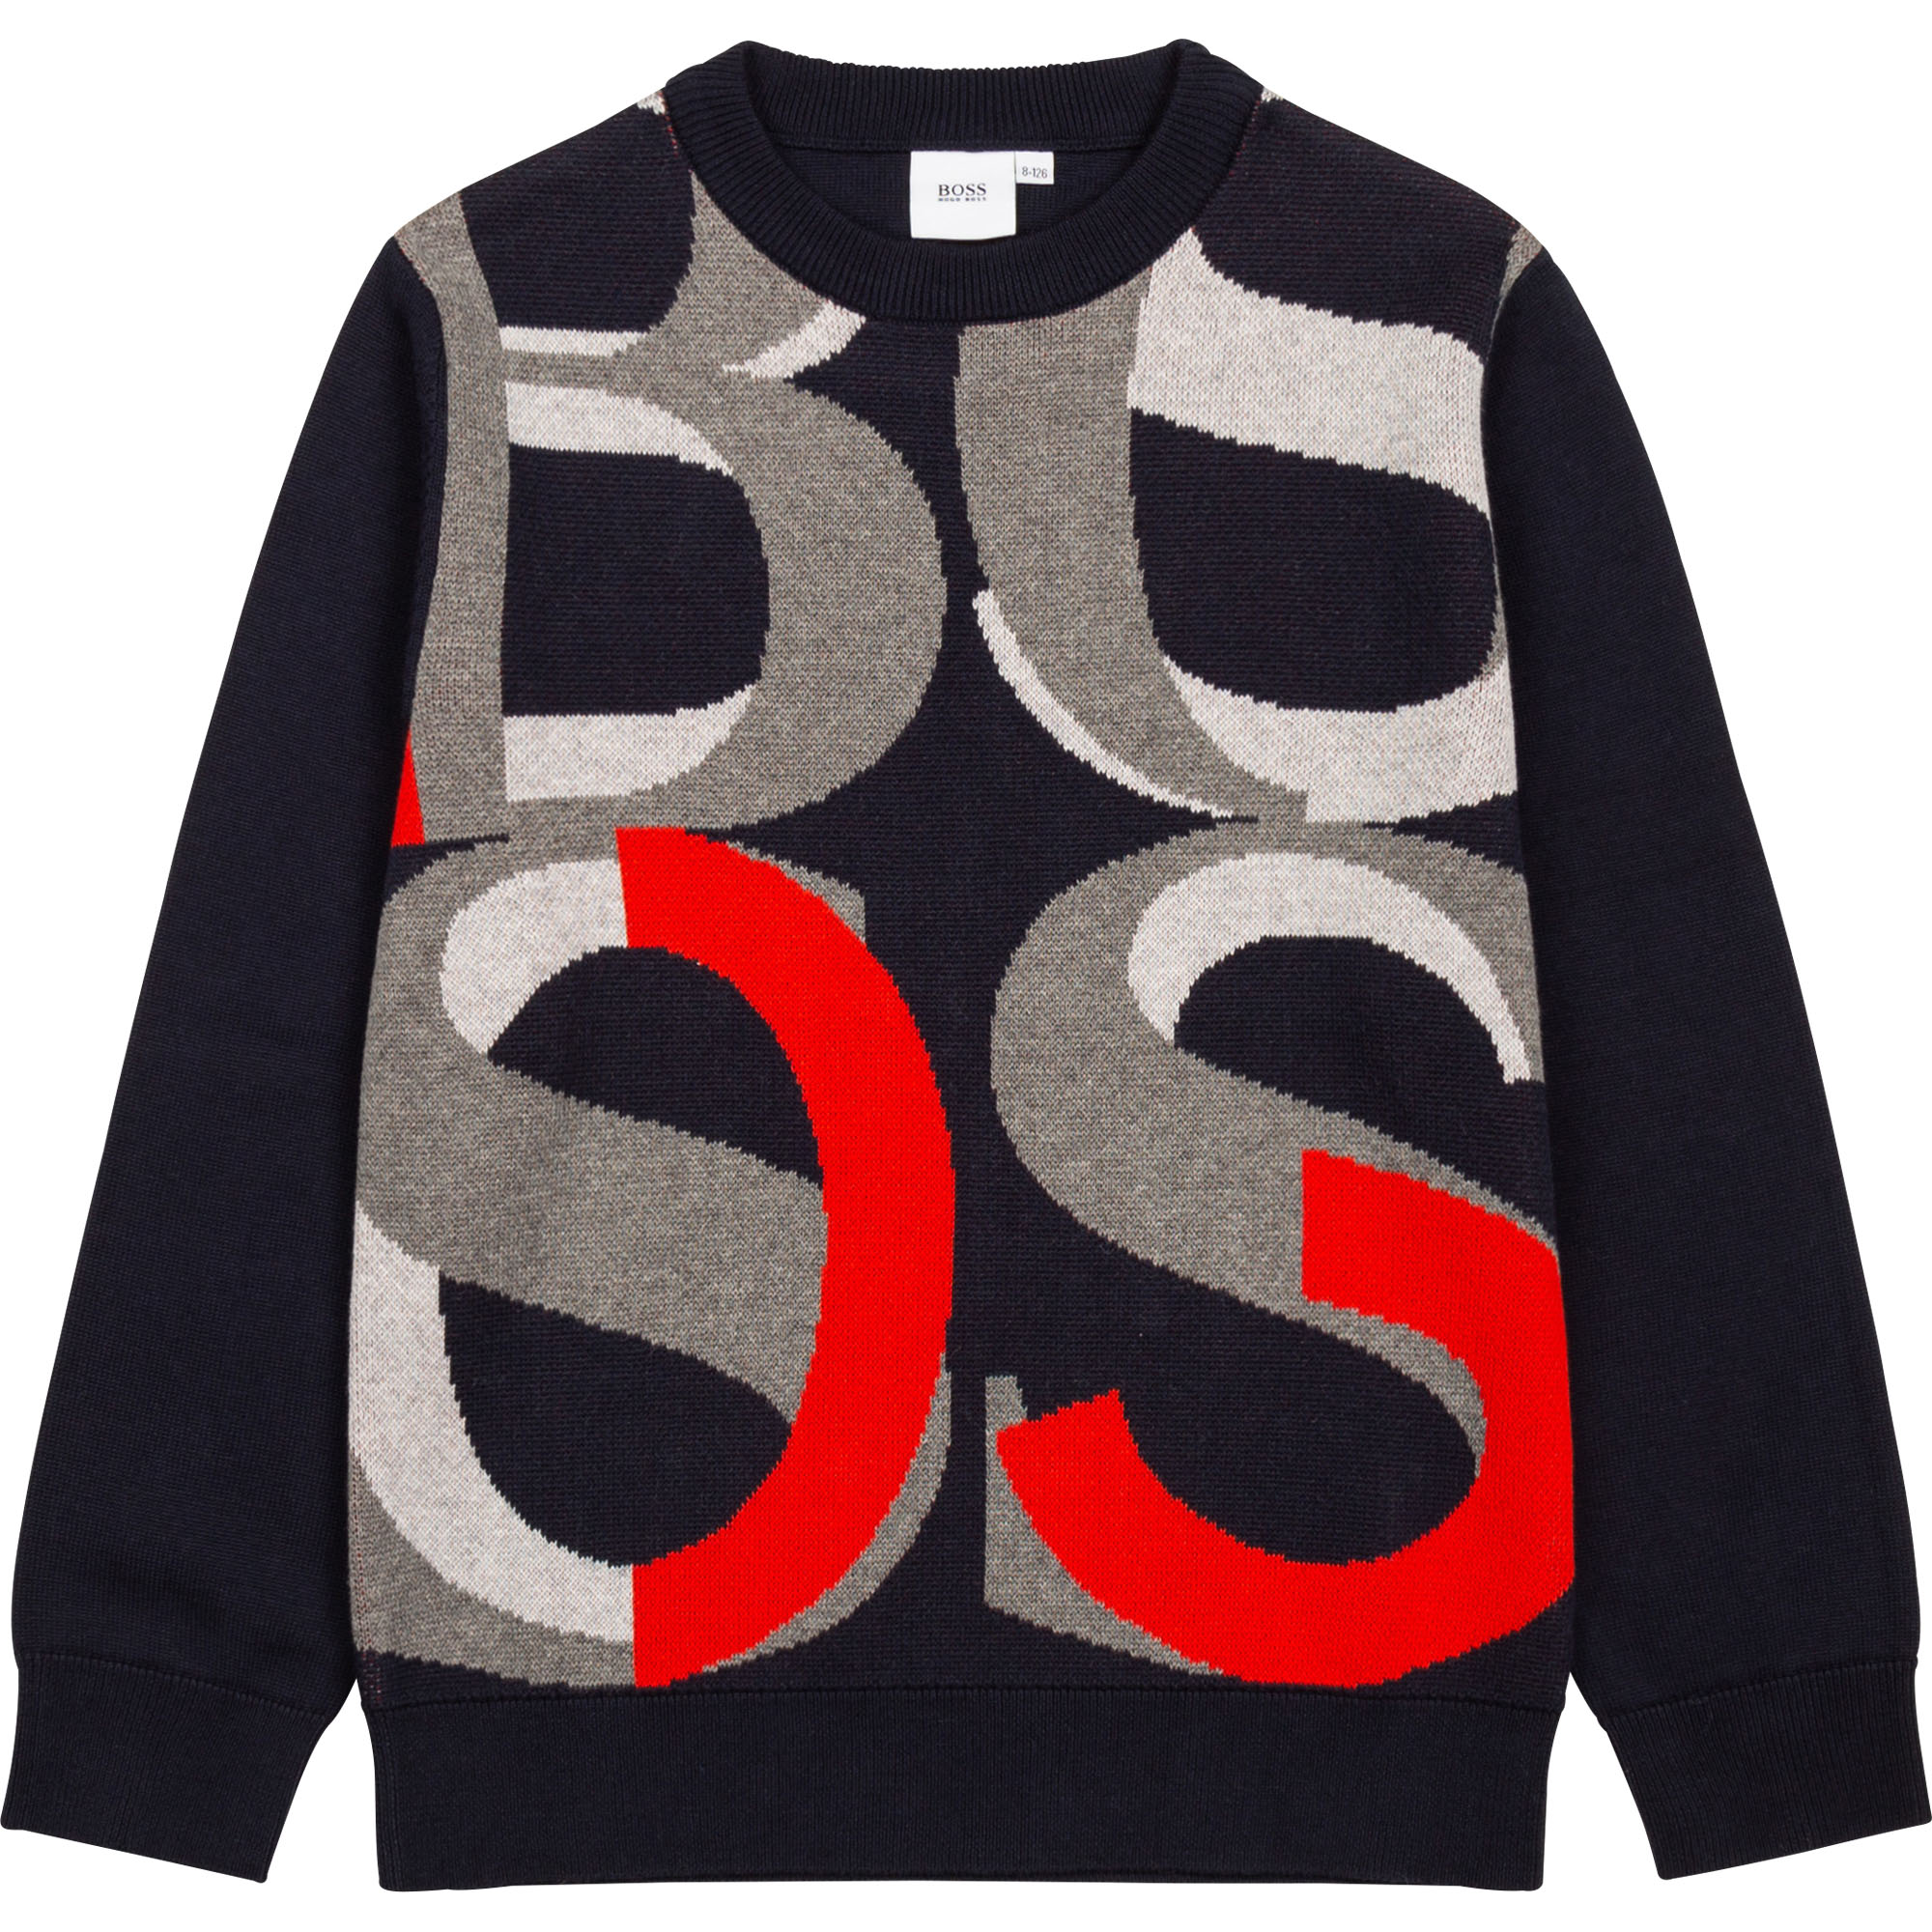 Tricot sweater with jacquard BOSS for BOY